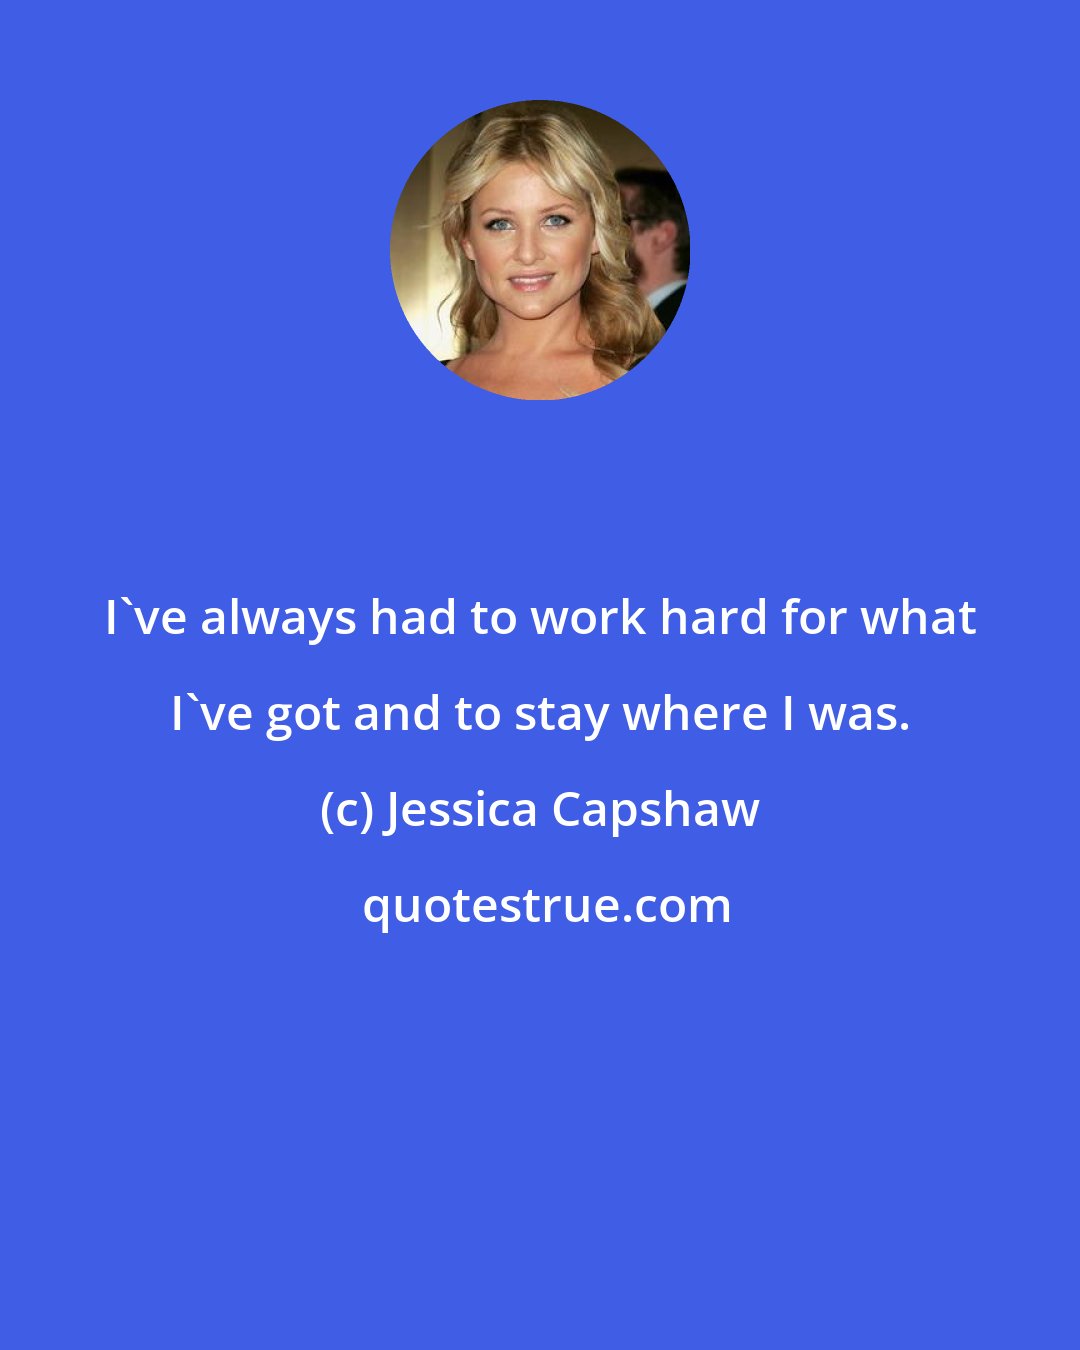 Jessica Capshaw: I've always had to work hard for what I've got and to stay where I was.